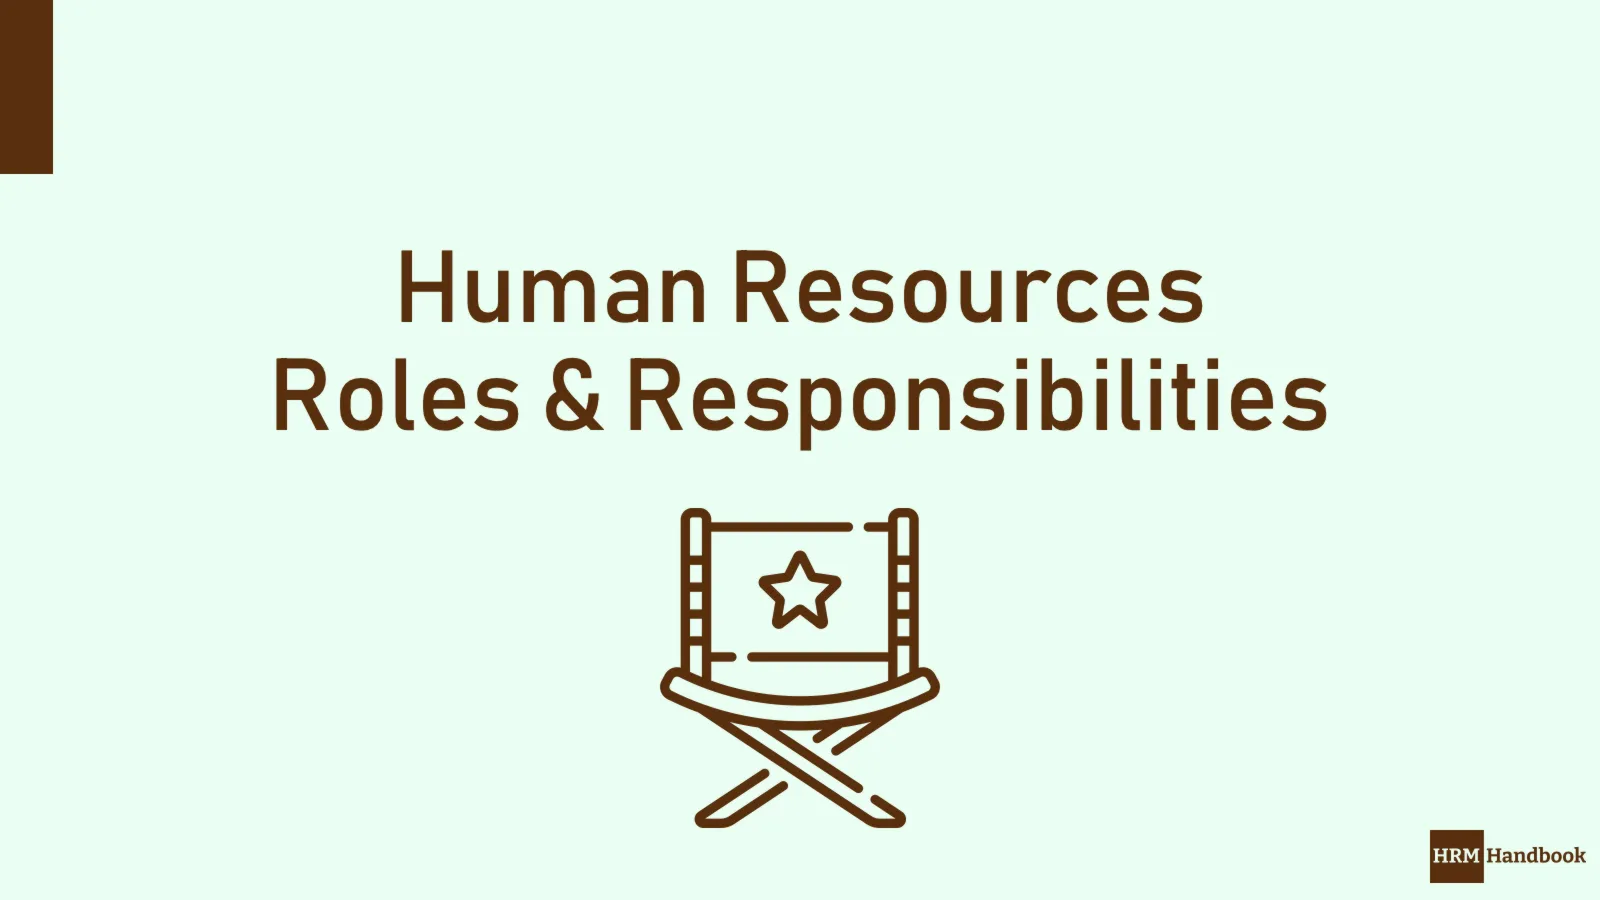 What are the roles and responsibilities of hrm